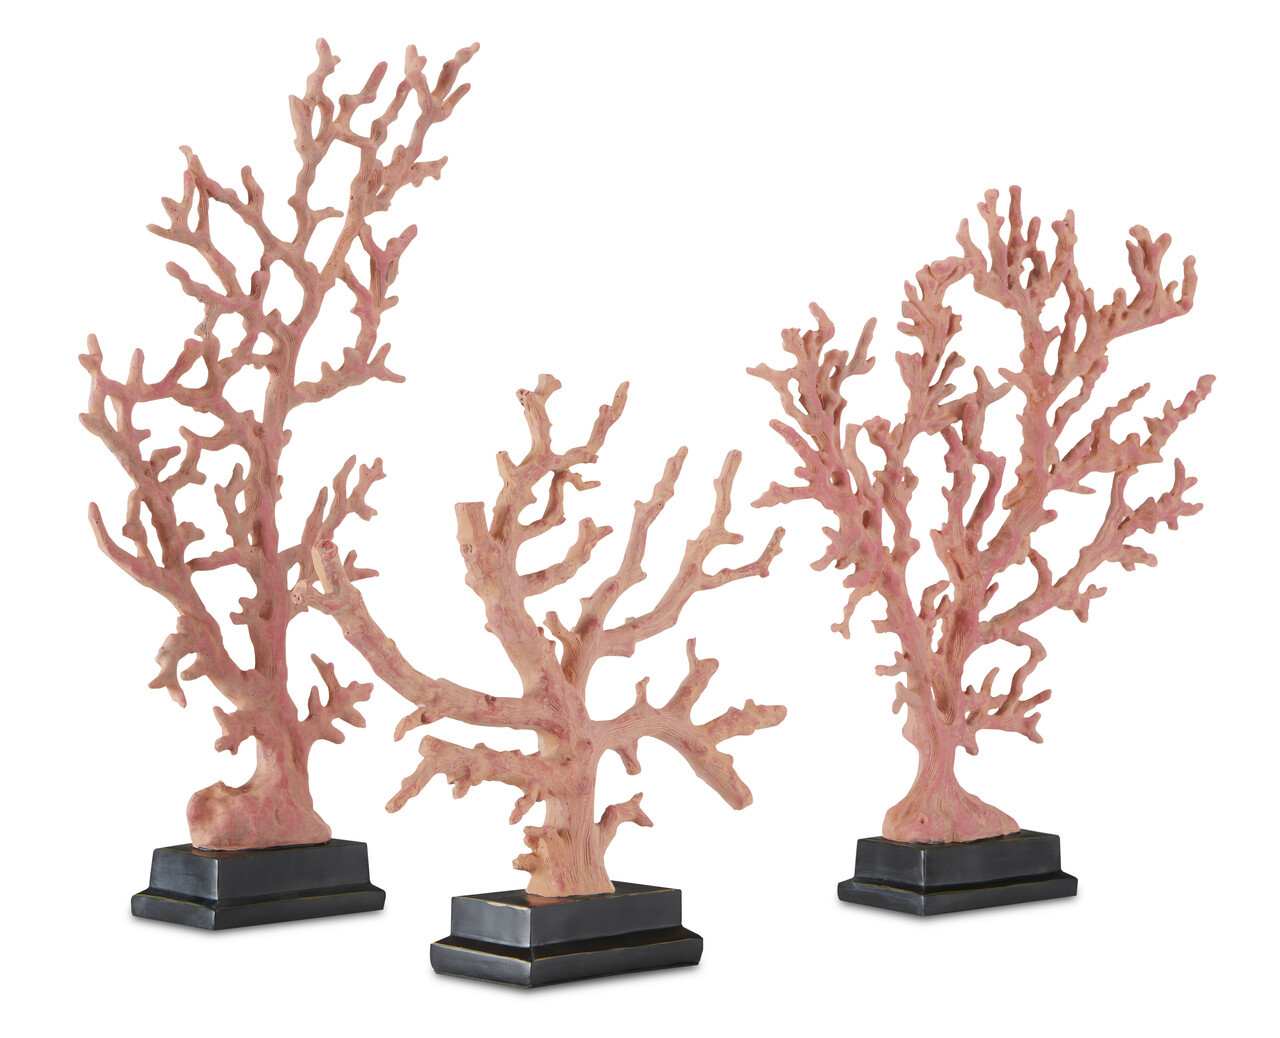 Amazing large Branch coral (3 sizes)